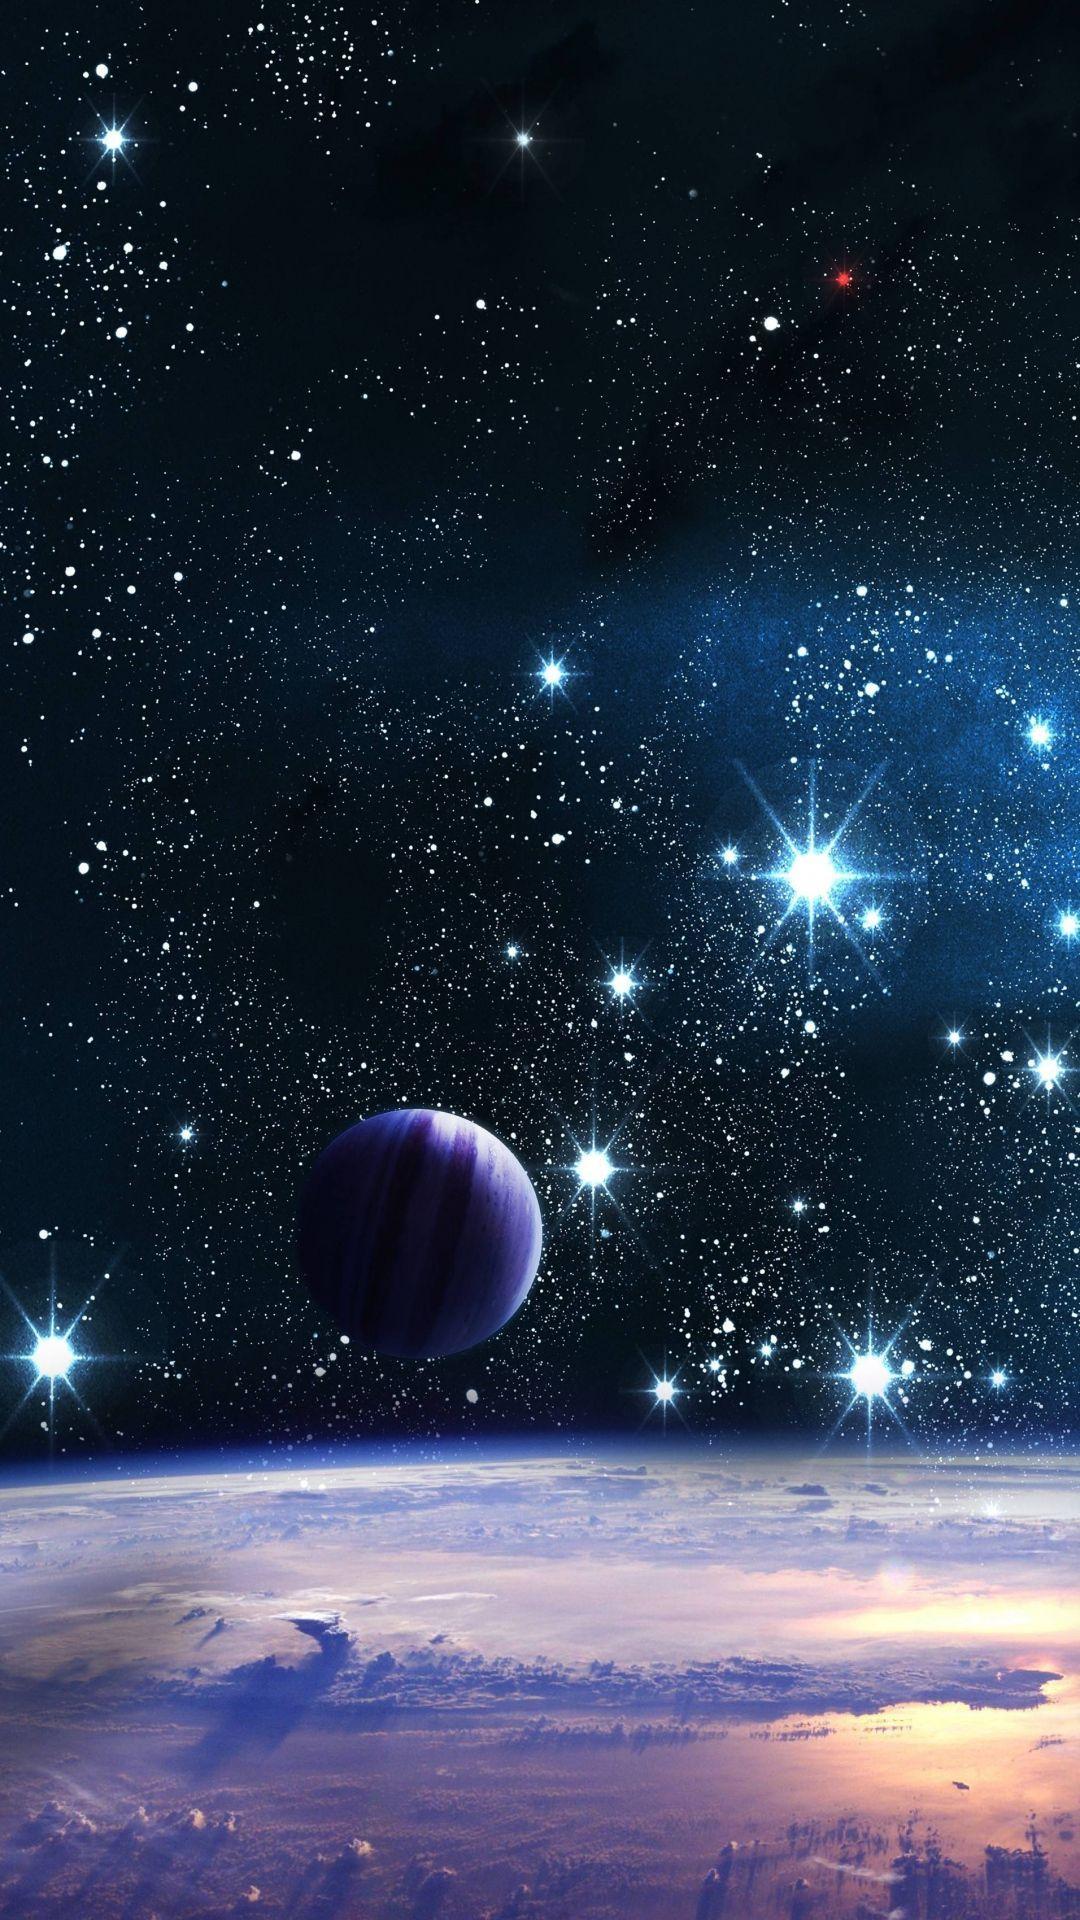 Stars and Planets Wallpapers - Top Free Stars and Planets Backgrounds